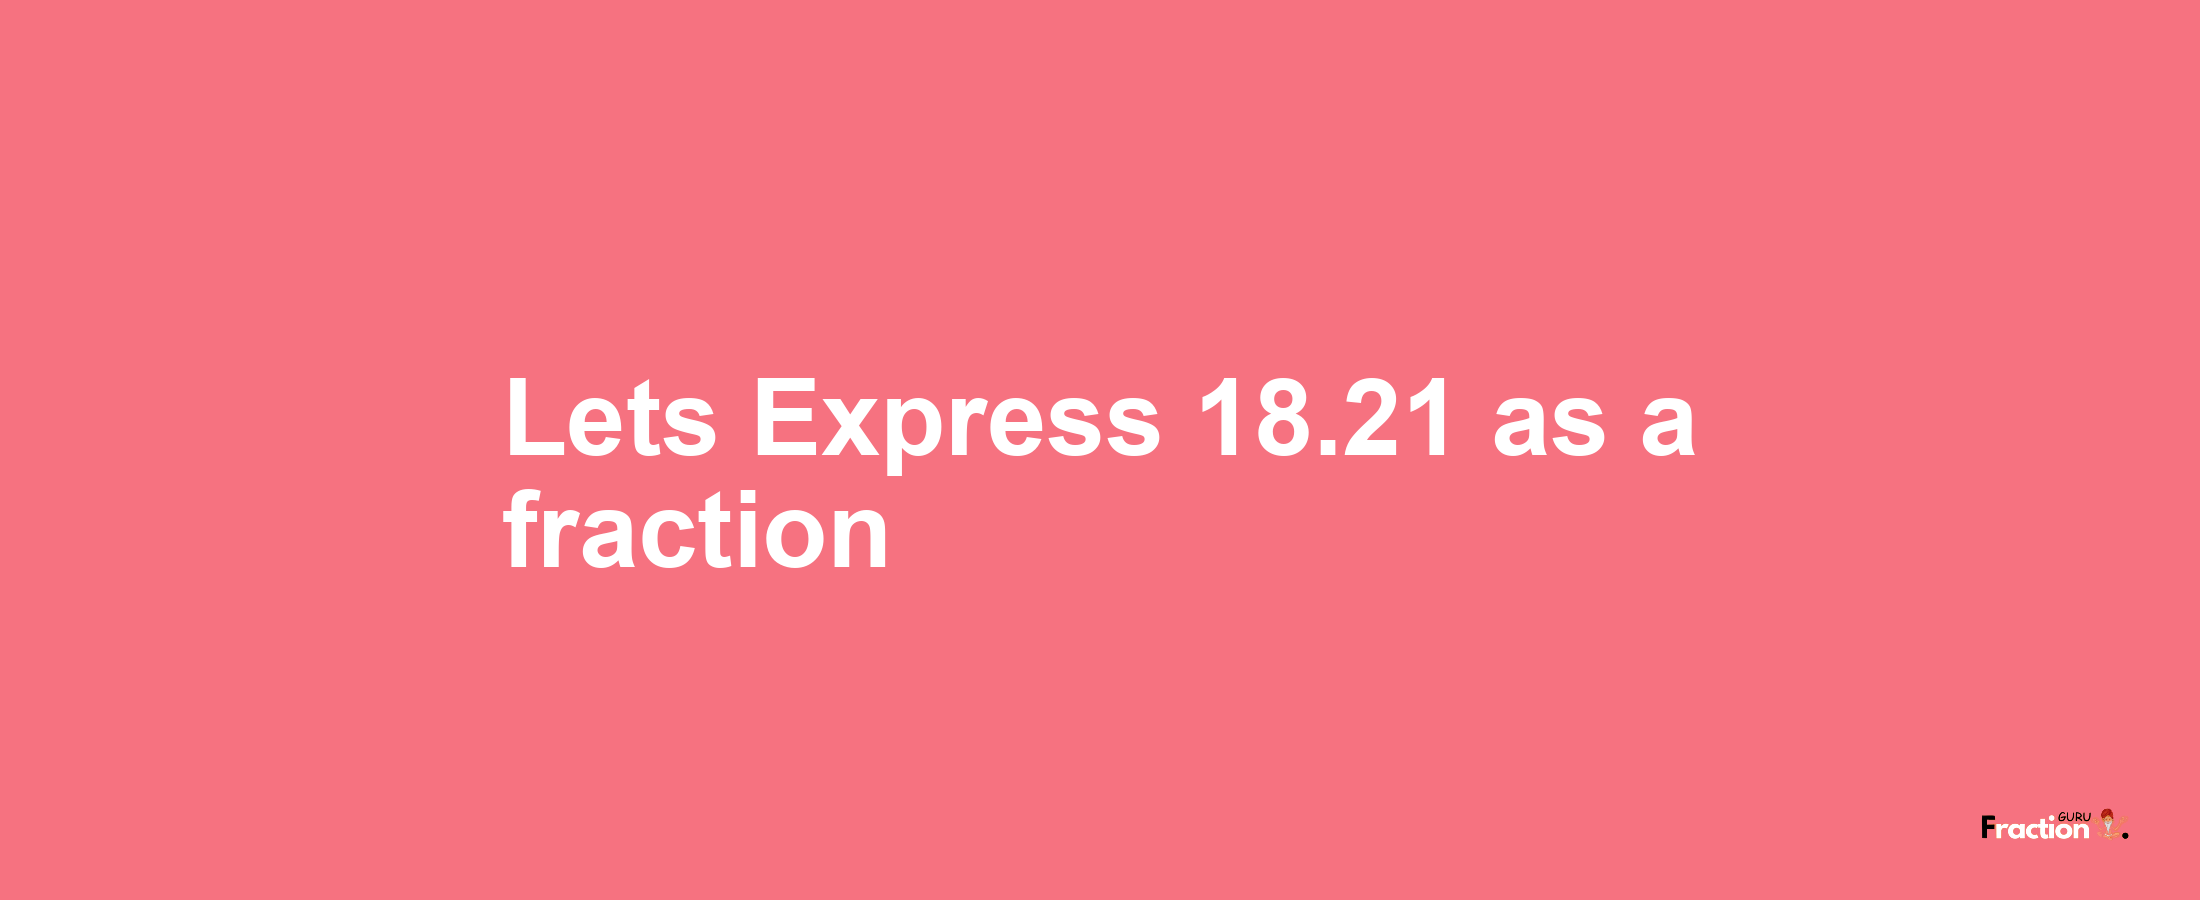 Lets Express 18.21 as afraction